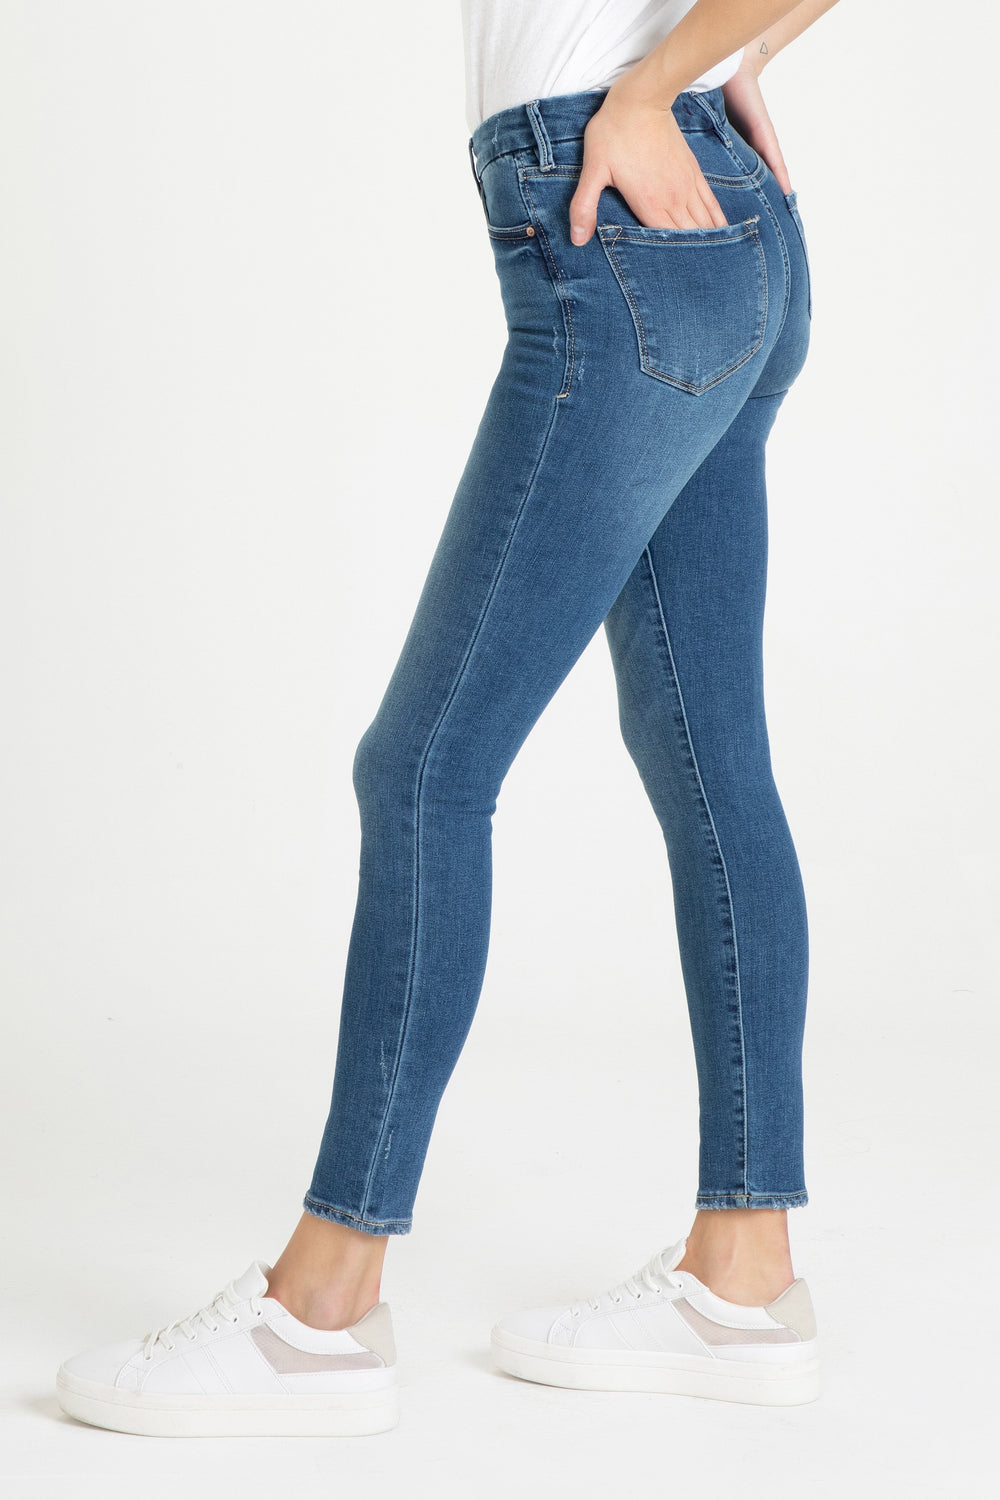 image of a female model wearing a OLIVIA SUPER HIGH RISE SKINNY JEANS FRONTAGE JEANS